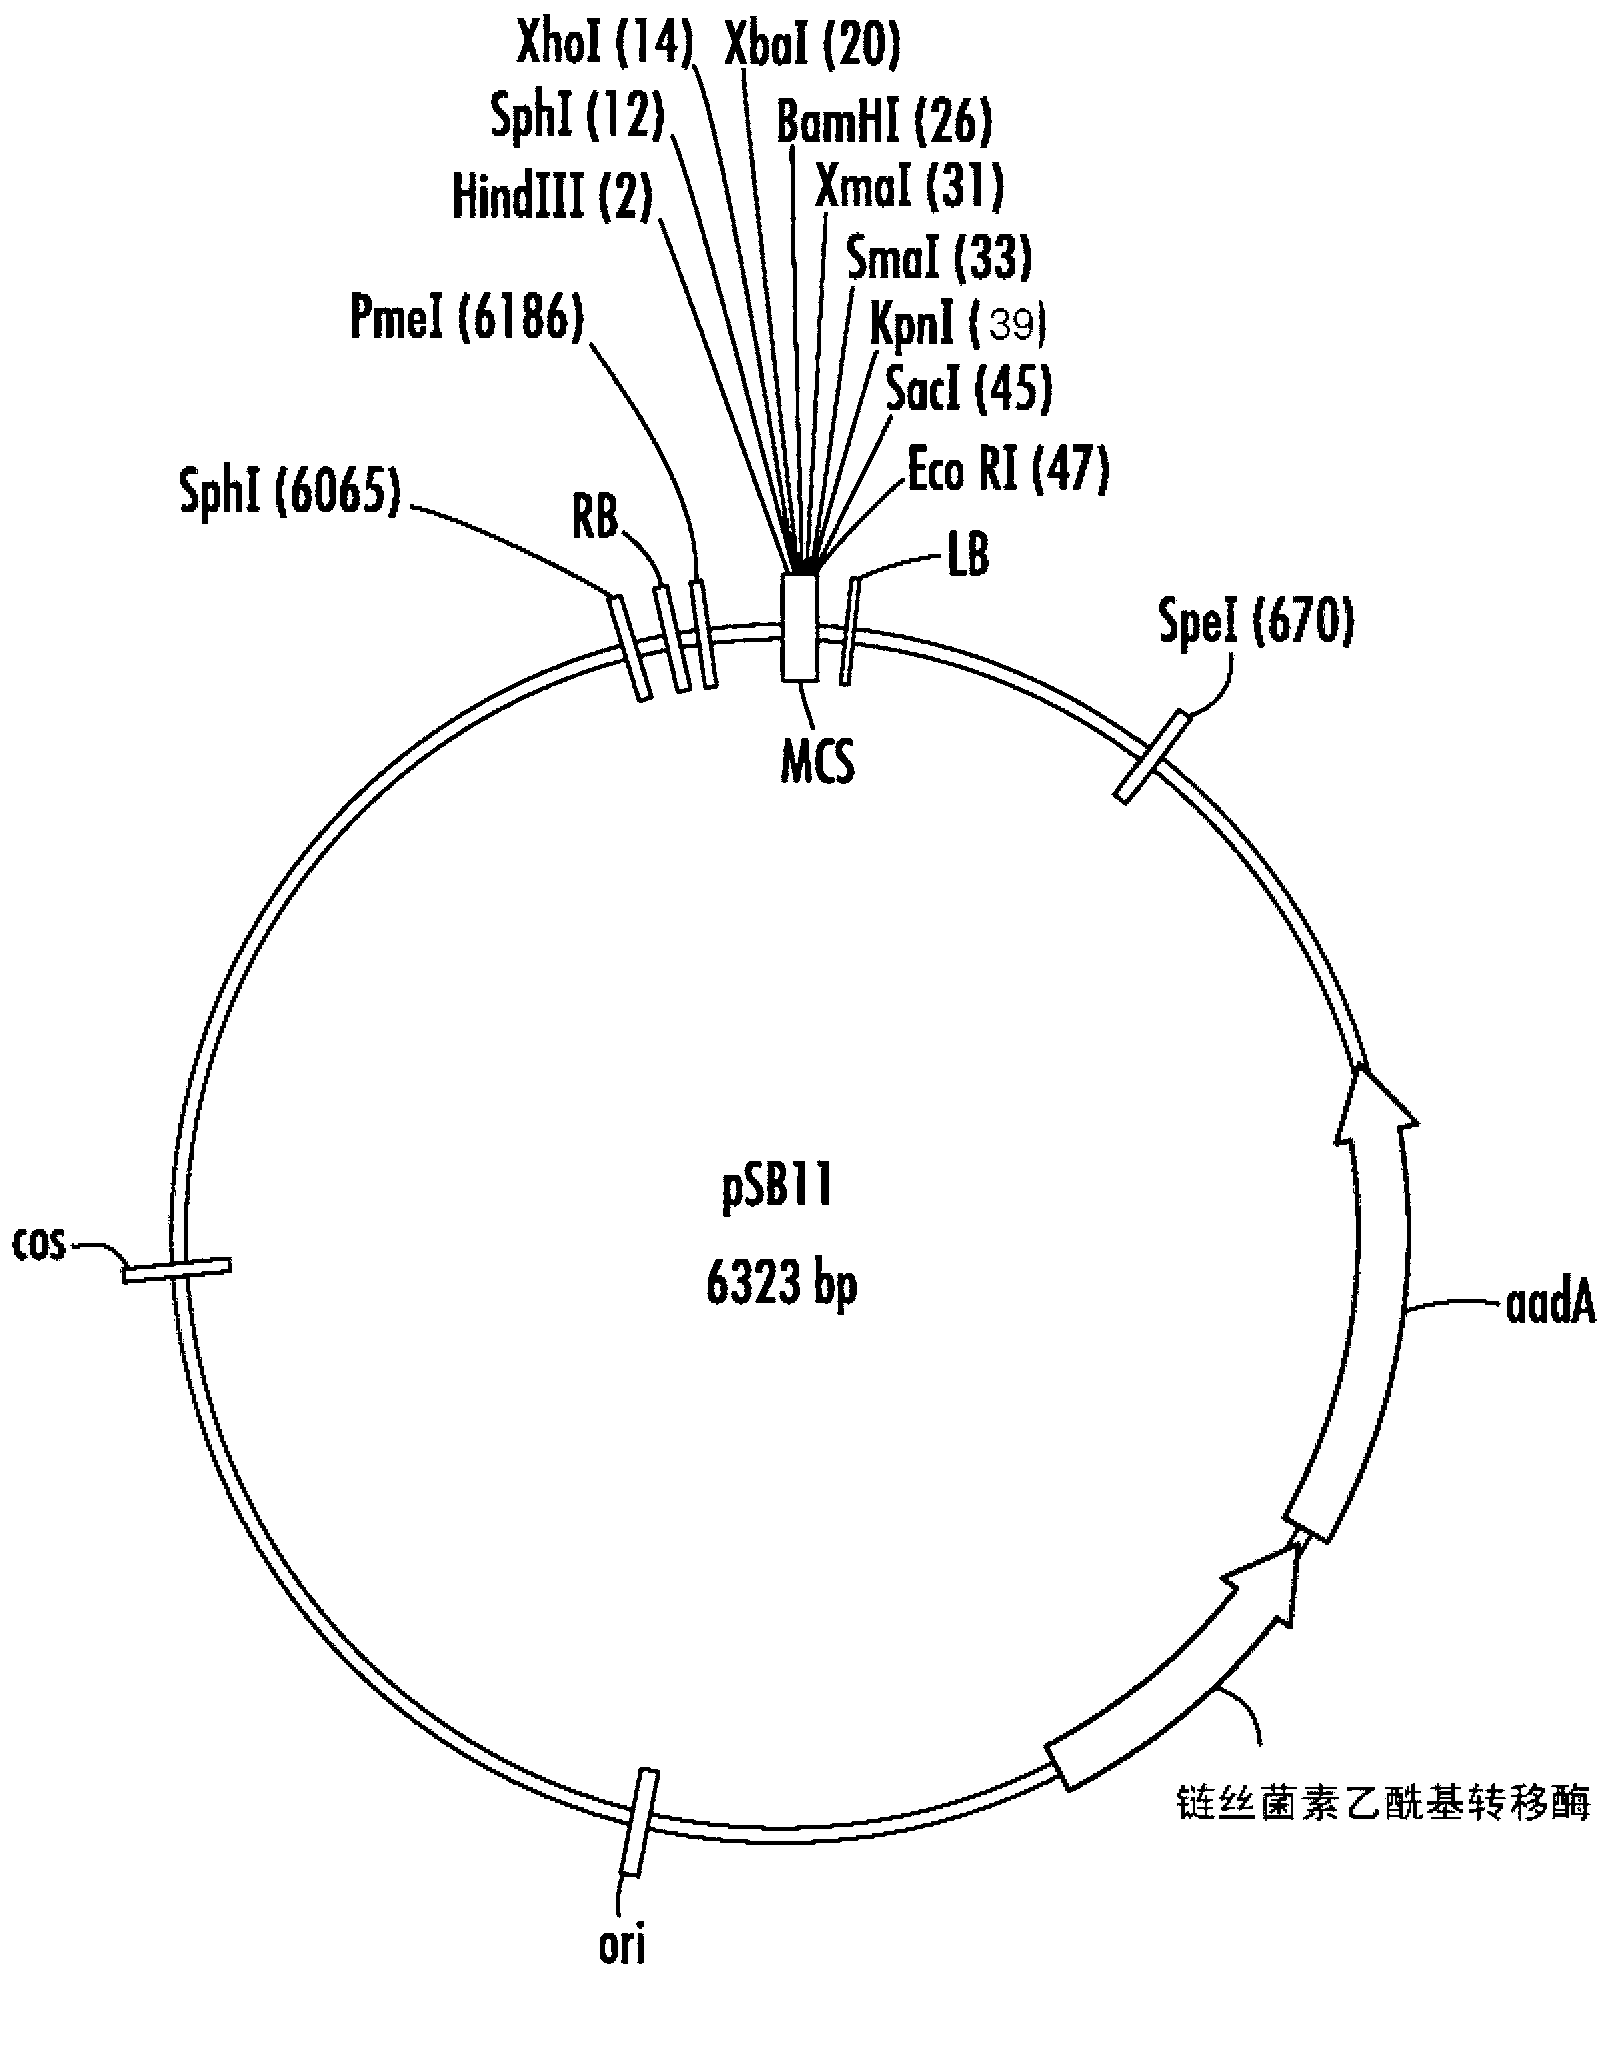 Plants expressing cell wall degrading enzymes and expression vectors